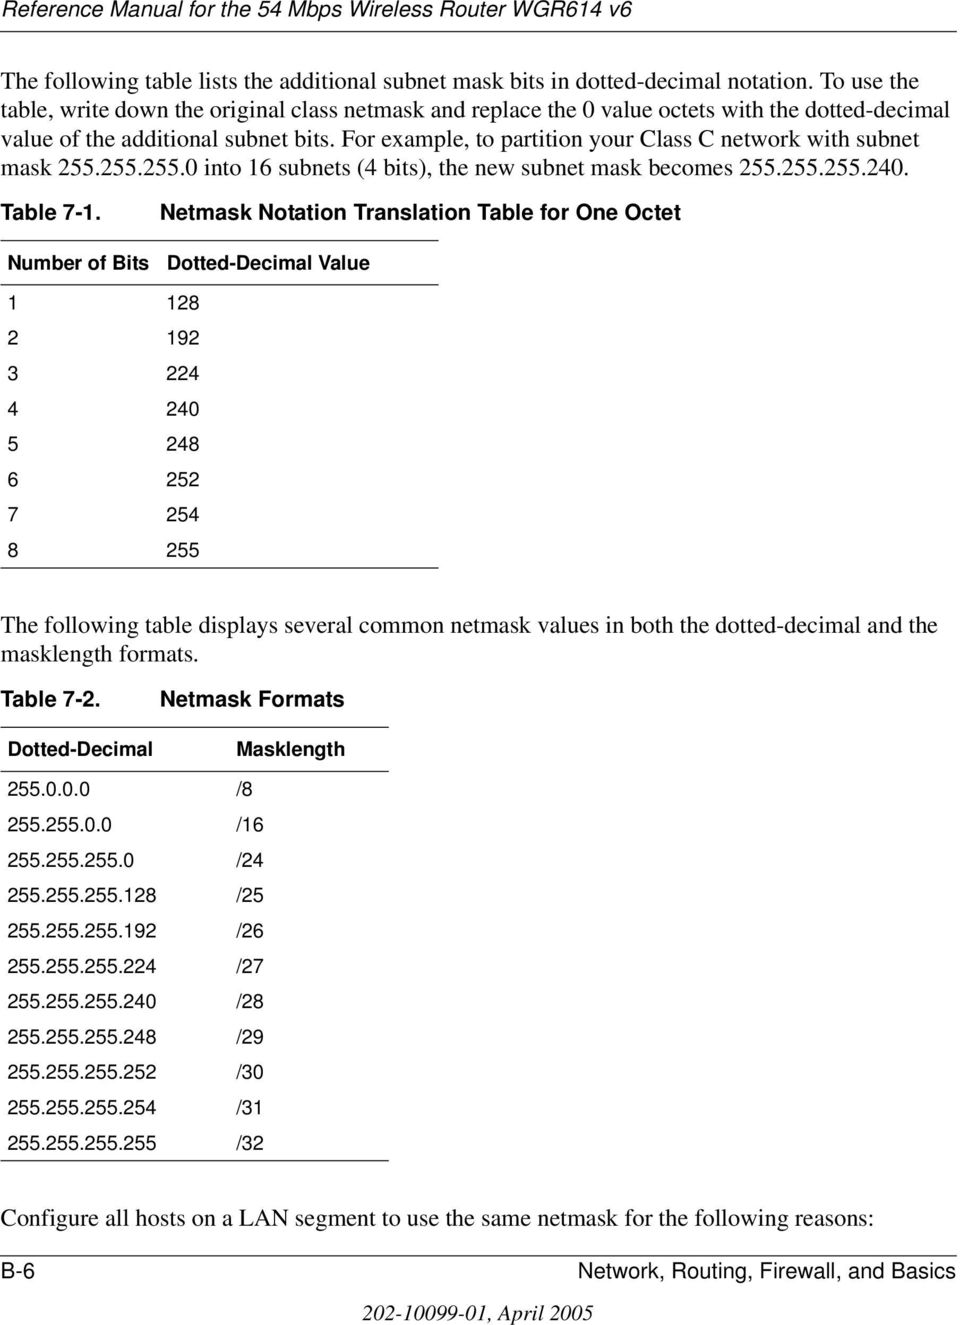 For example, to partition your Class C network with subnet mask 255.255.255.0 into 16 subnets (4 bits), the new subnet mask becomes 255.255.255.240. Table 7-1.